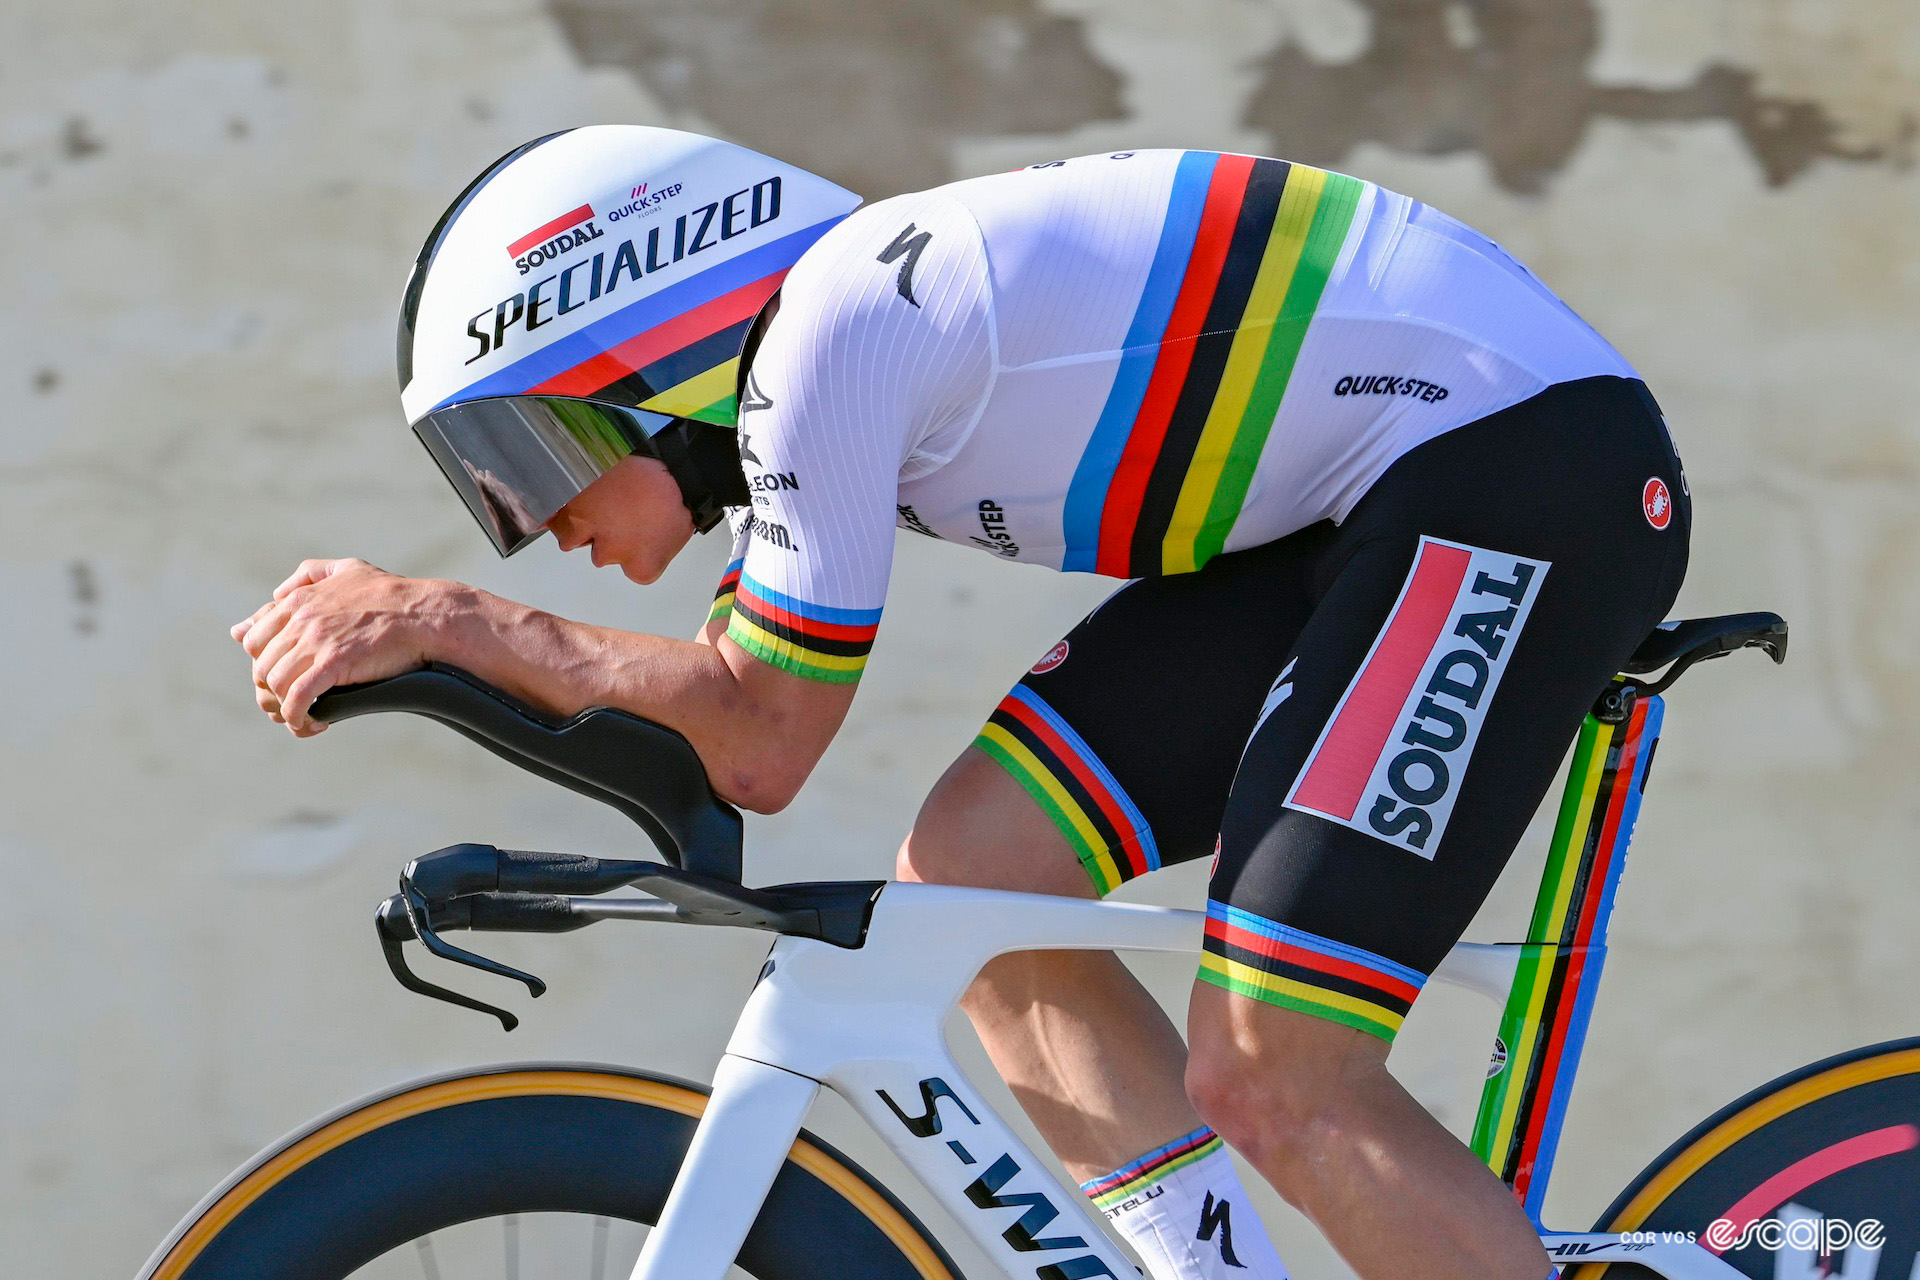 World champion Remco Evenepoel in the rainbow bands during the Volta ao Algarve stage 4 time trial.